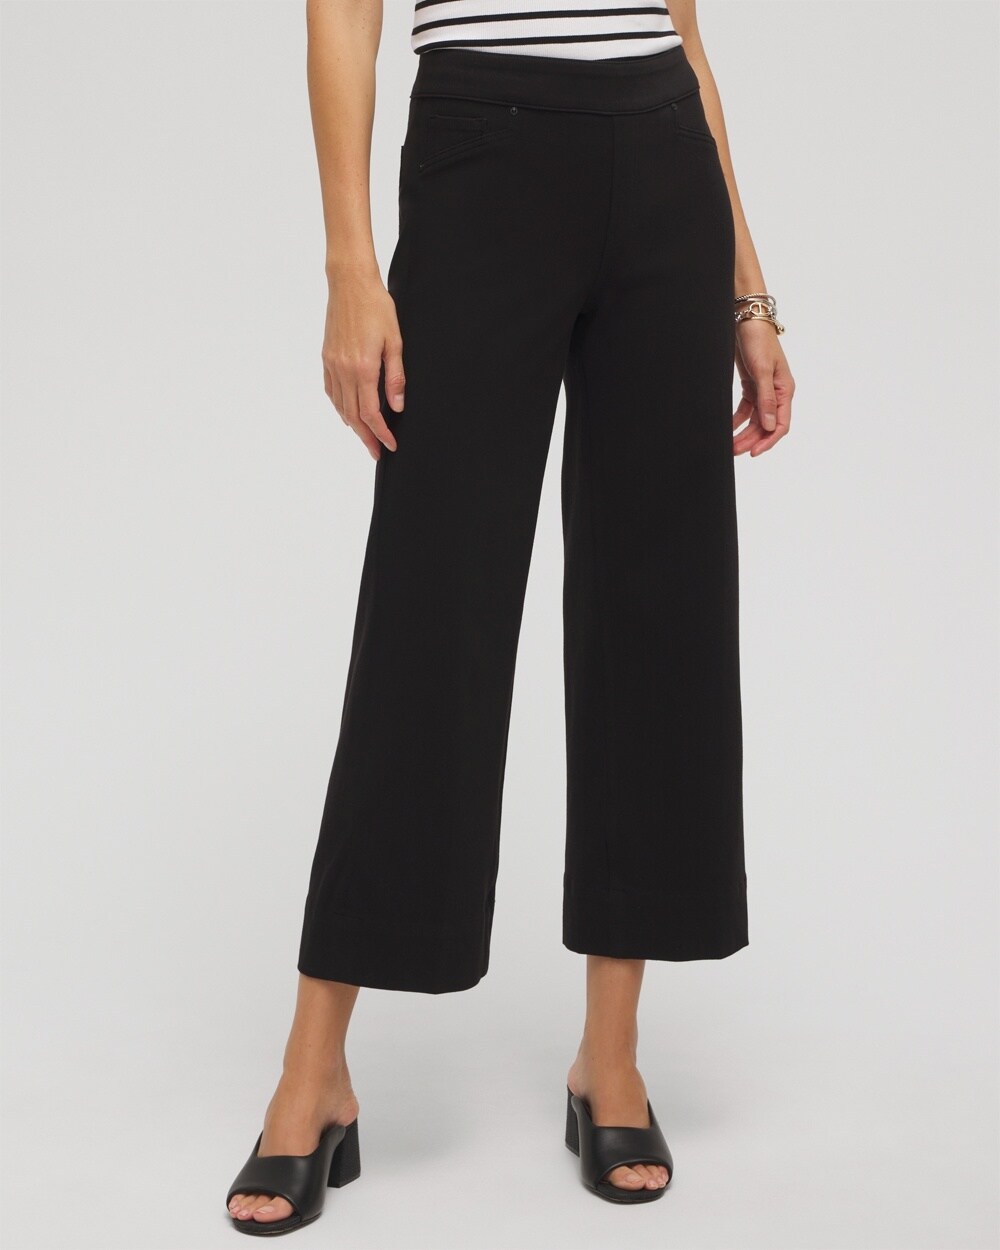 Petite Travelers Pull On Cropped Jeans